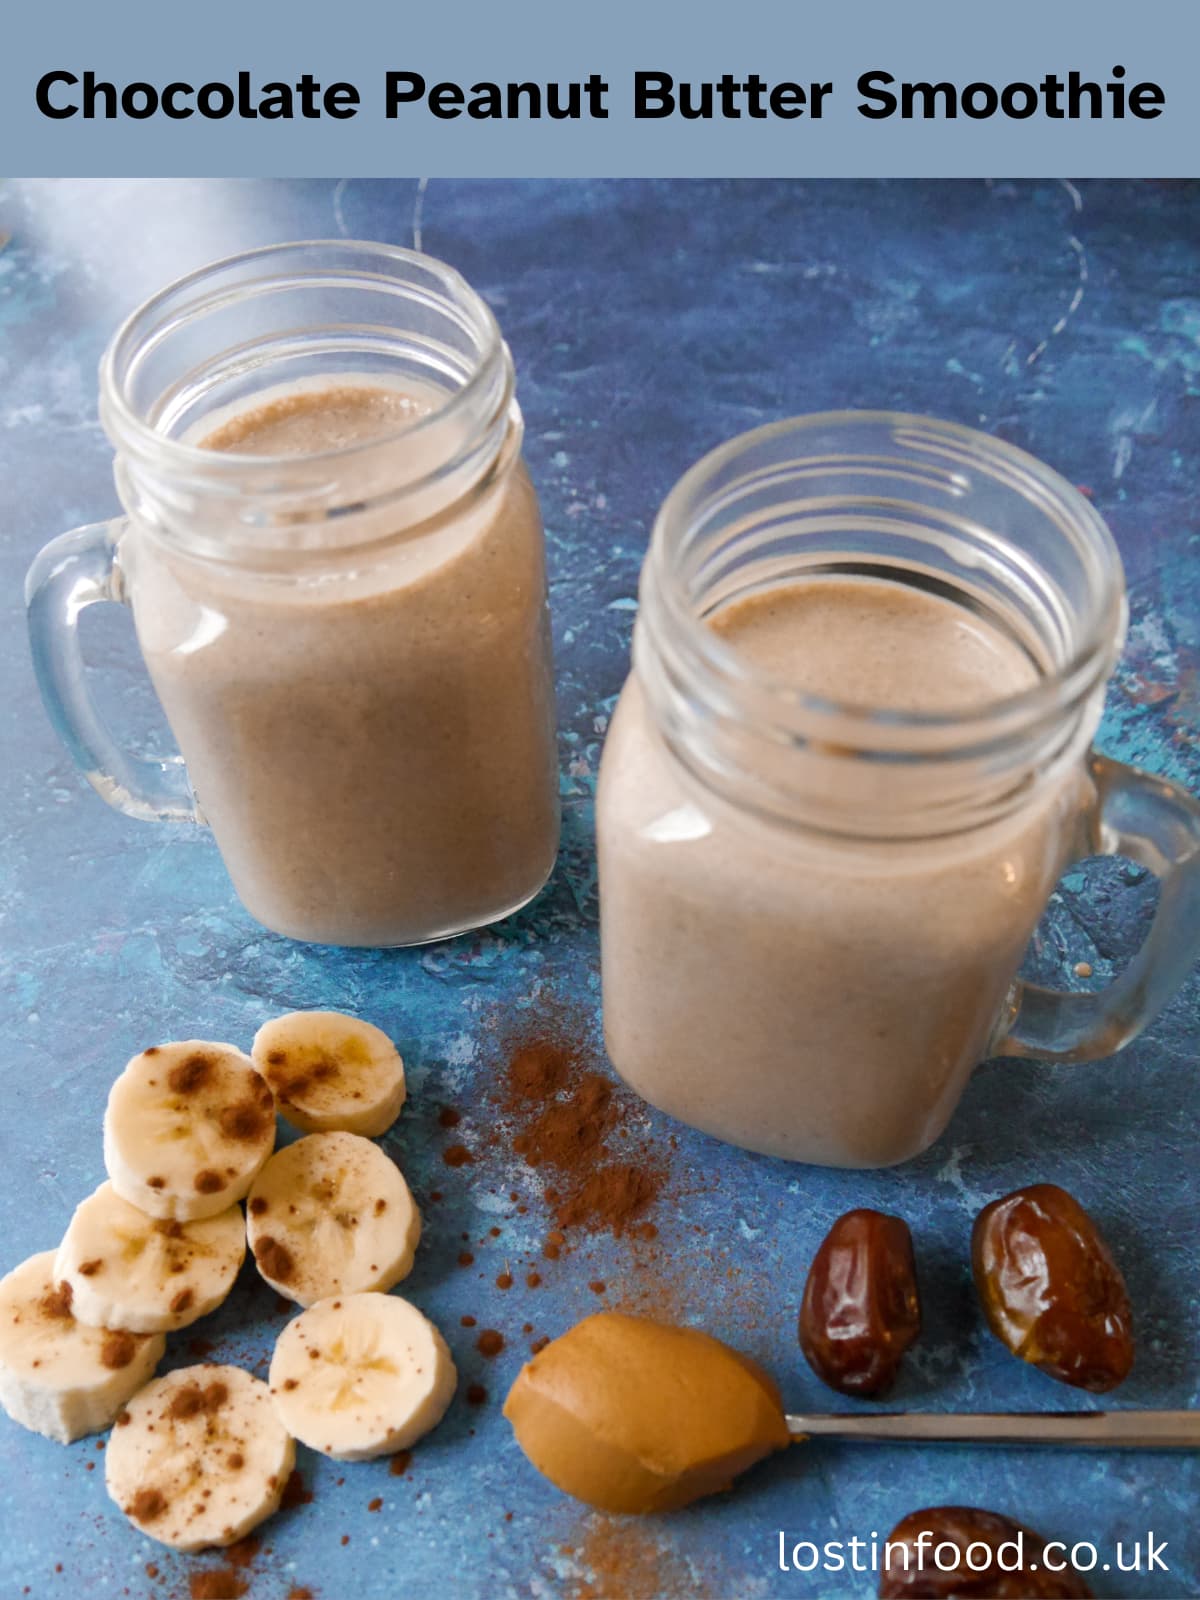 Pinnable image with recipe title and 2 glasses filled with chocolate peanut butter smoothie with sliced bananas, whole dates and a spoon of peanut butter set alongside.